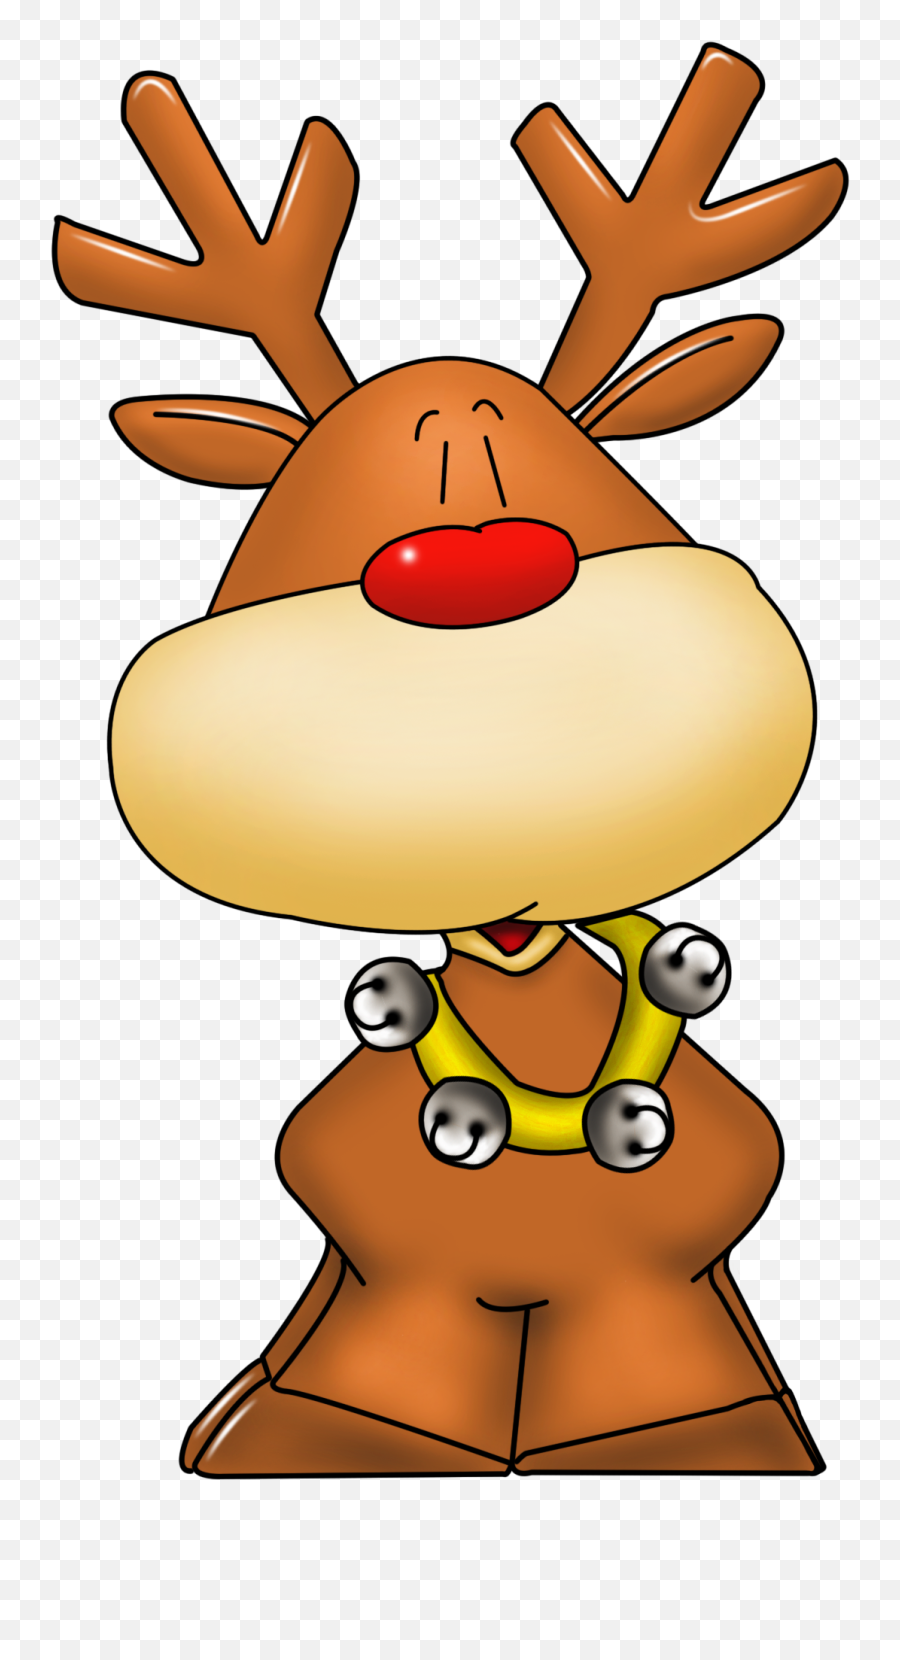 Rudolph Png Picture - Peppa Pig Merry Christmas Card,Rudolph Png